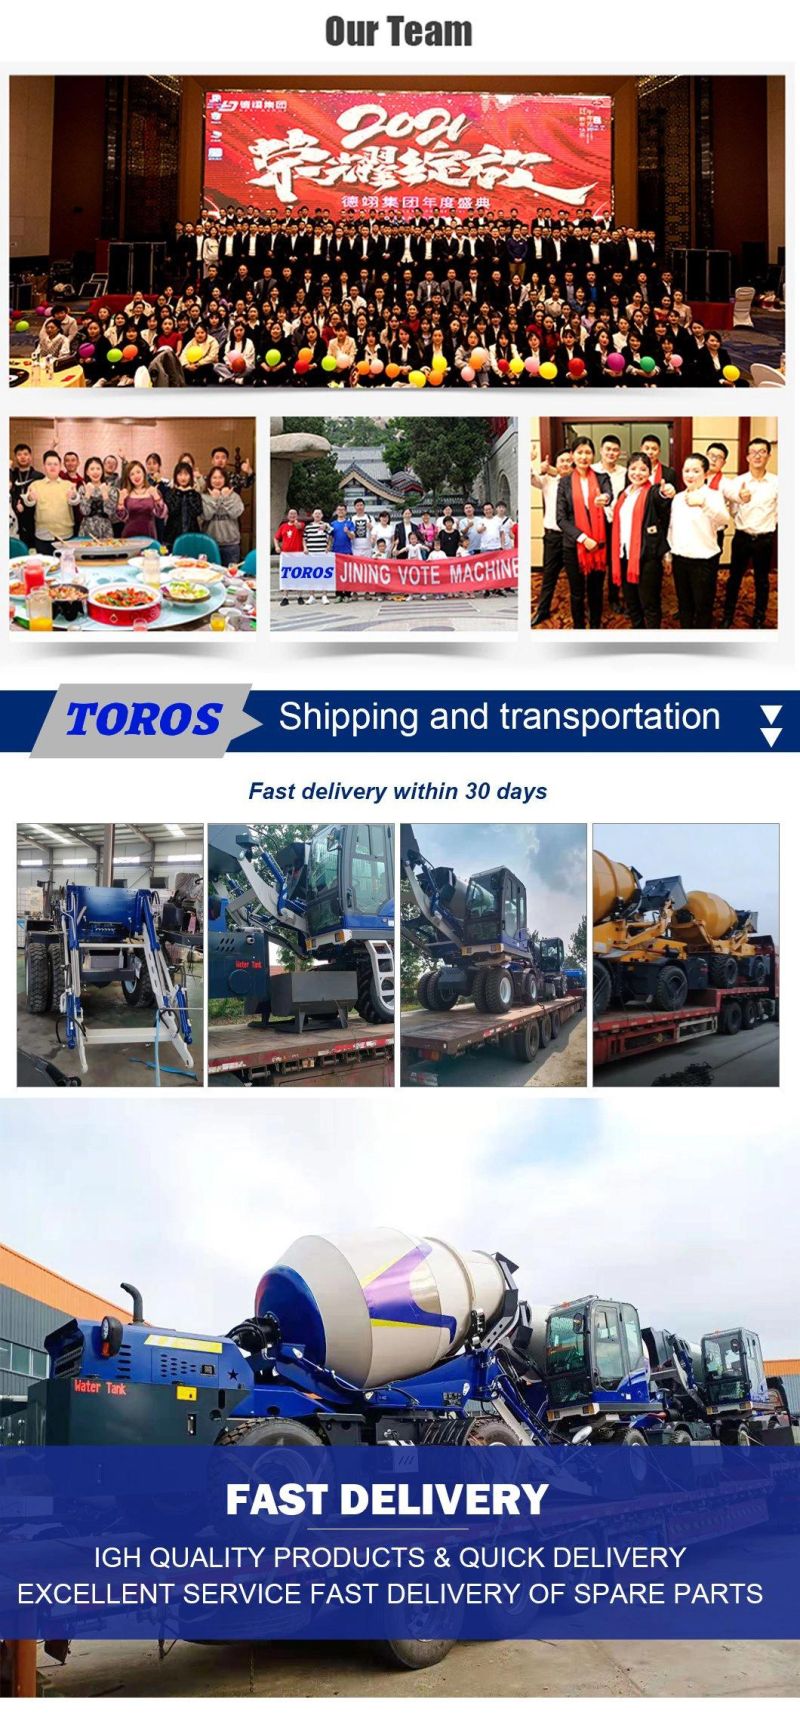 Hydraulic 3.5m3 Self Loading 4 Wheels Portable Cement Mixers with Water Tank Concrete Mixer Mixers for Concrete